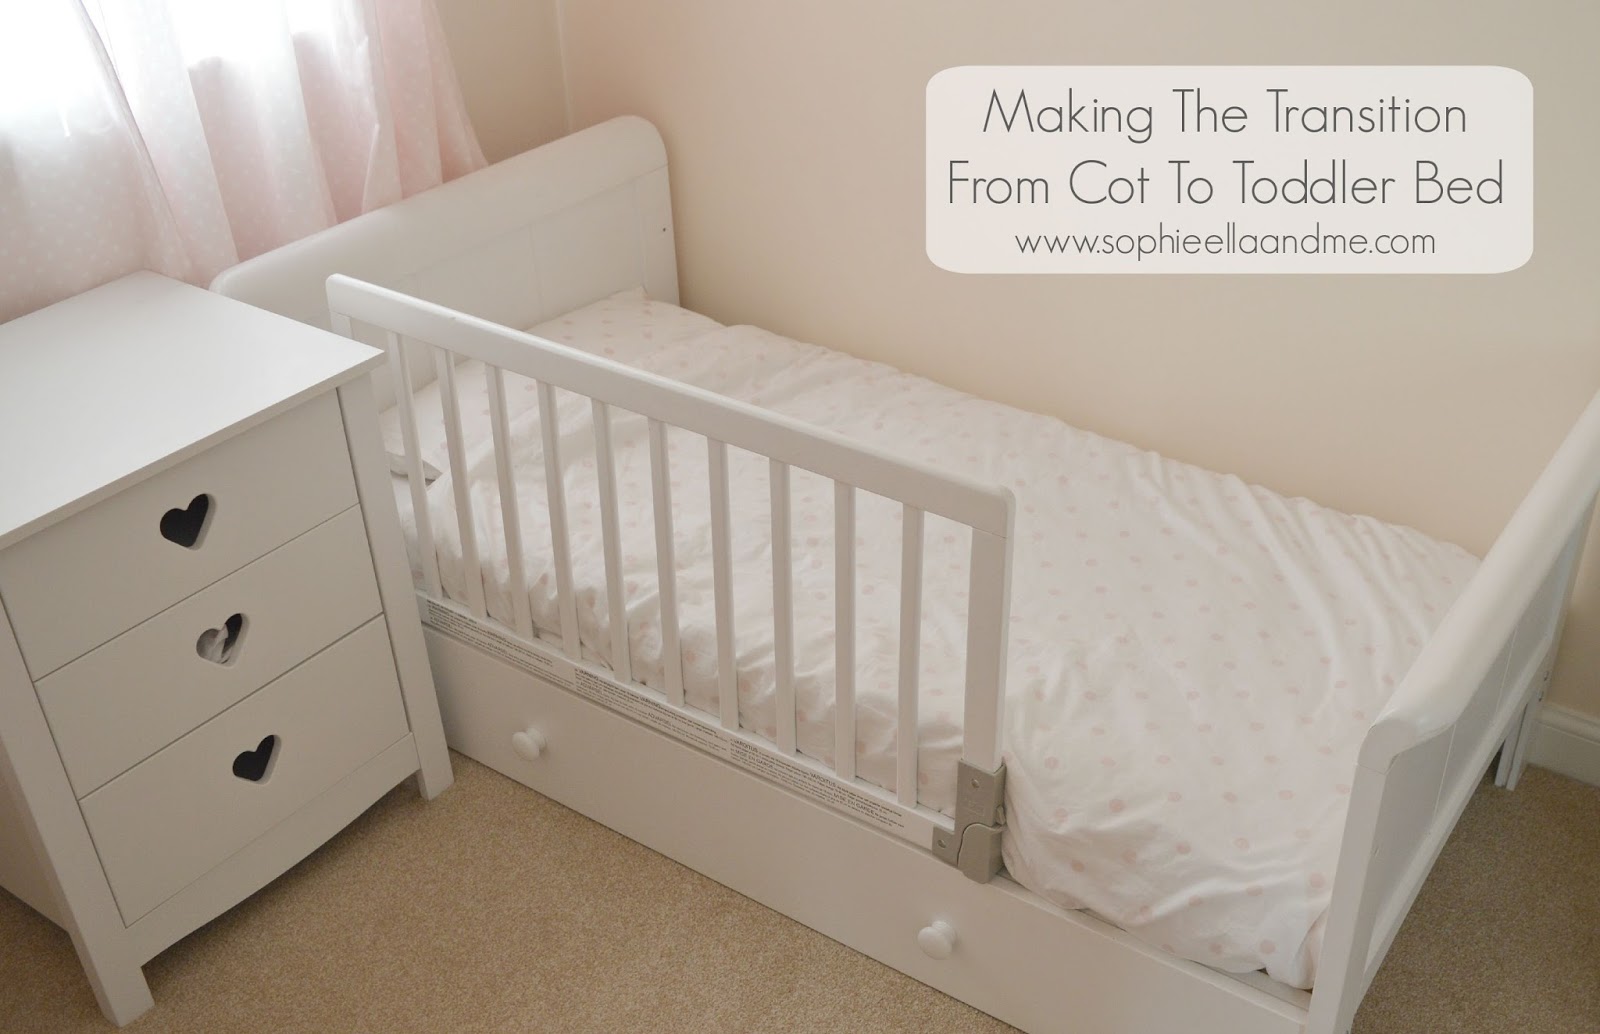 Cots for 1 year old making the transition from cot to toddler bed ZLFKVGN